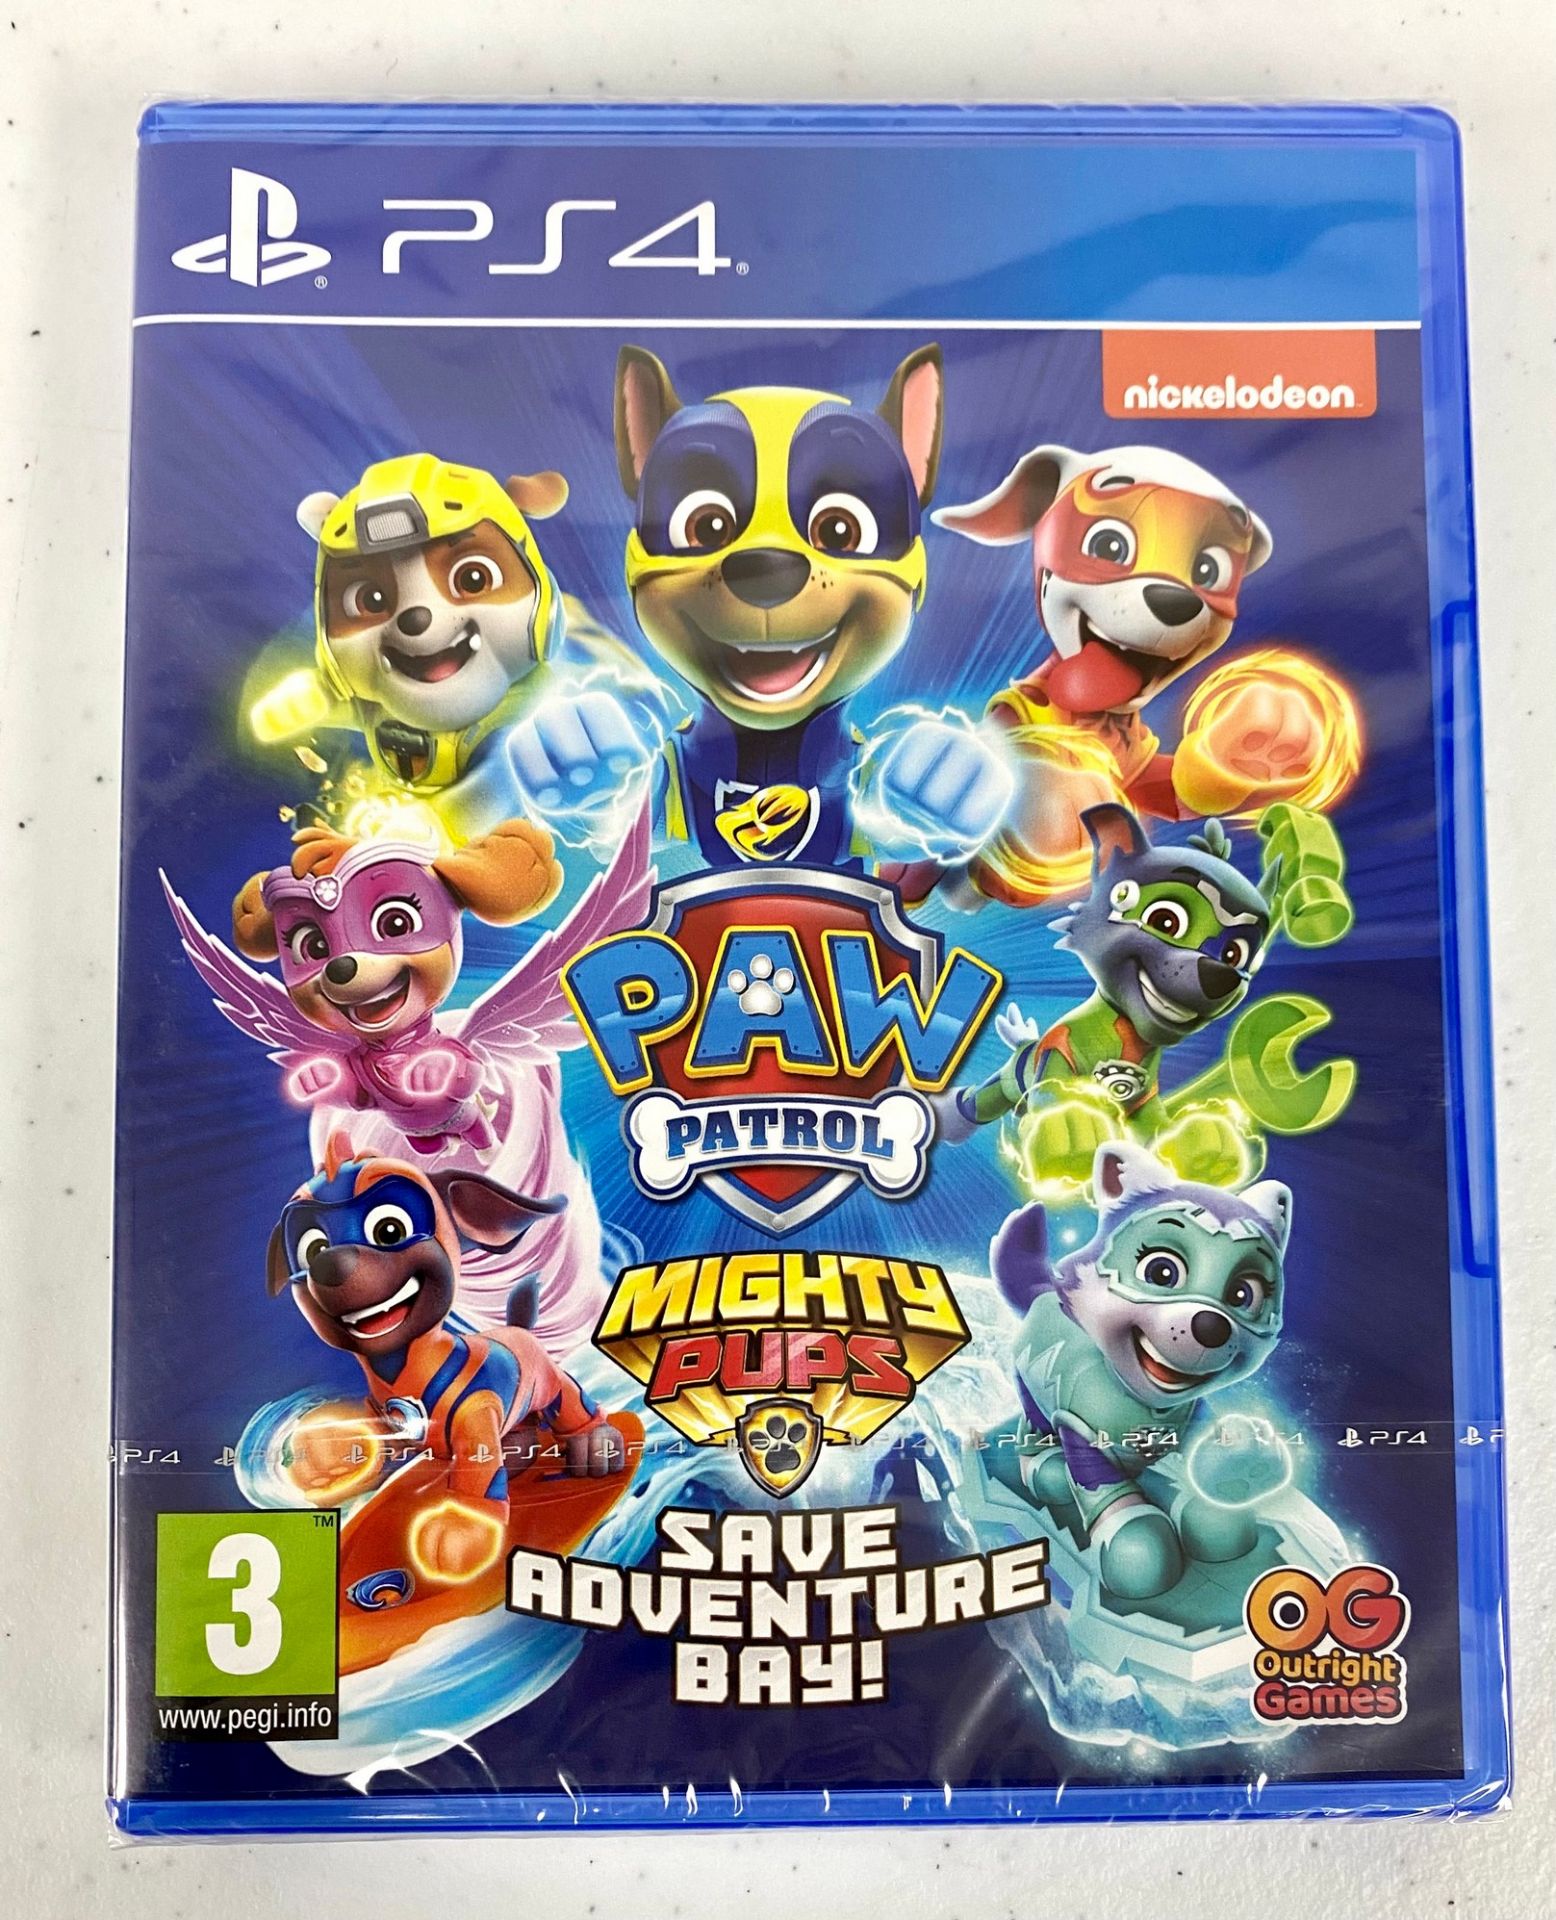 Ten as new PAW Patrol: Mighty Pups Save Adventure Bay! Game Disks for Sony PlayStation 4 (EAN: 50605